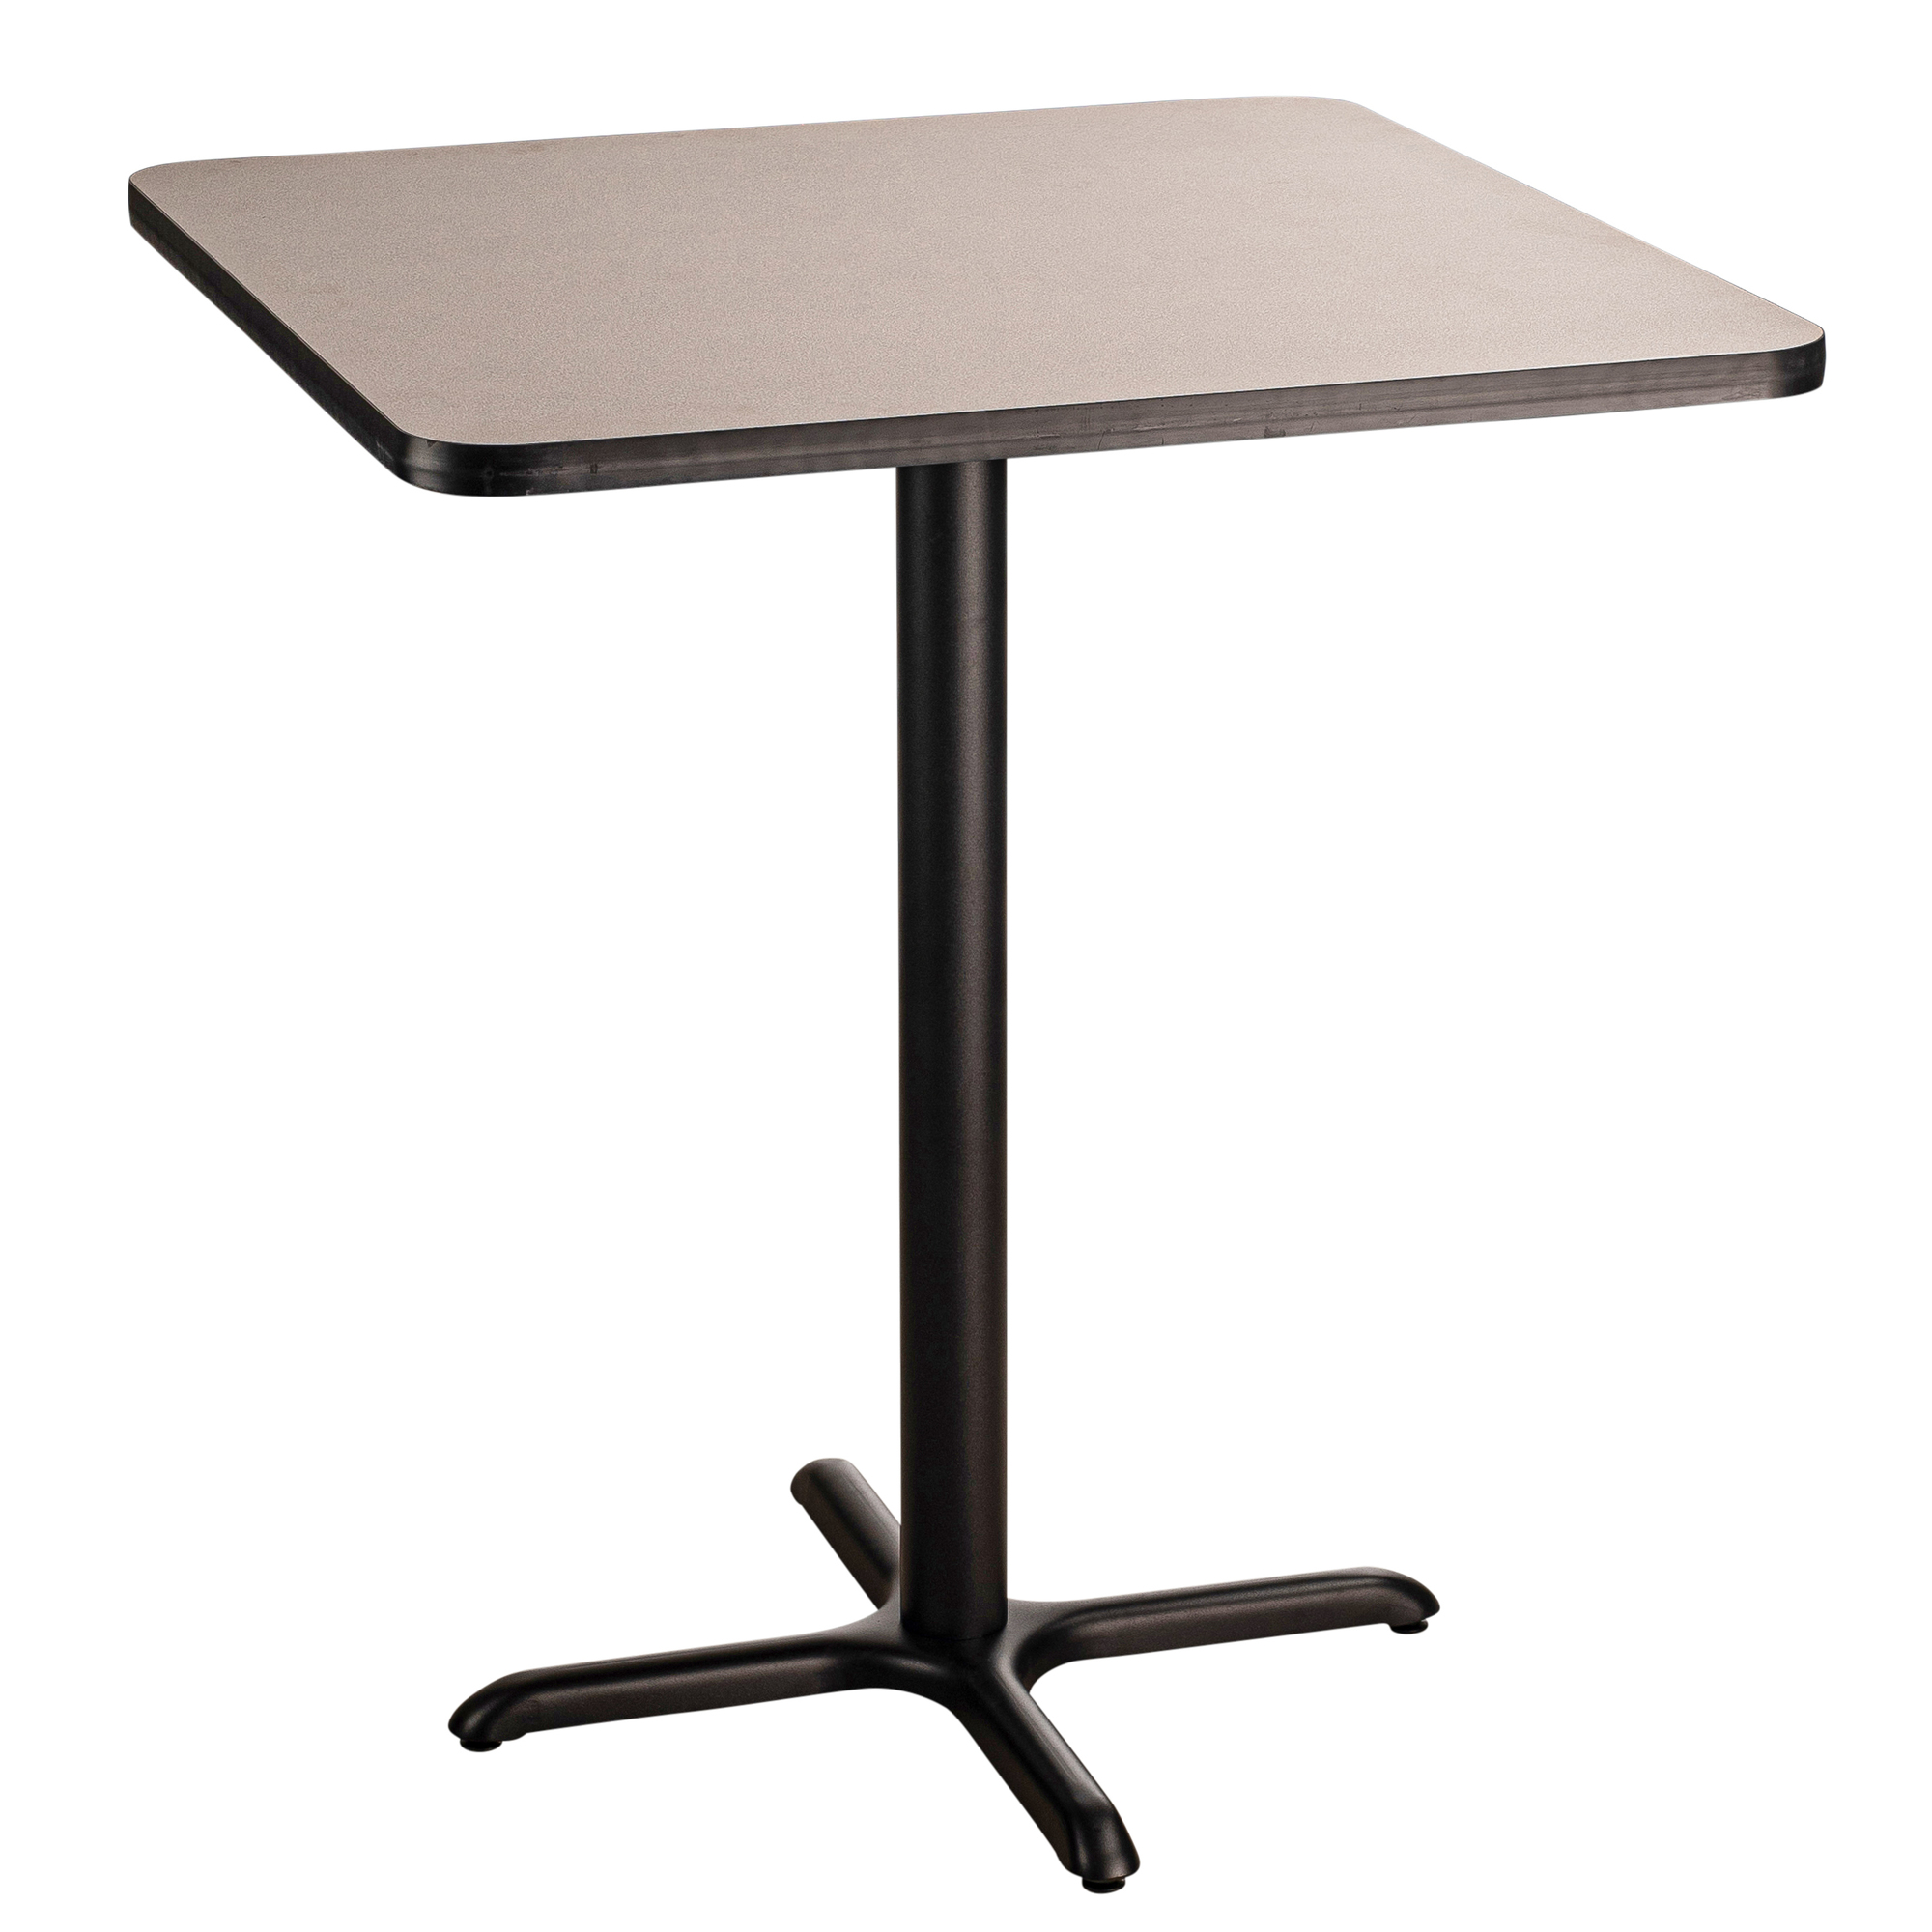 Cafe Table, 36x36x42 Square """"X"""" Base, Height 42 in, Model - National Public Seating CT33636XBPBTMGY